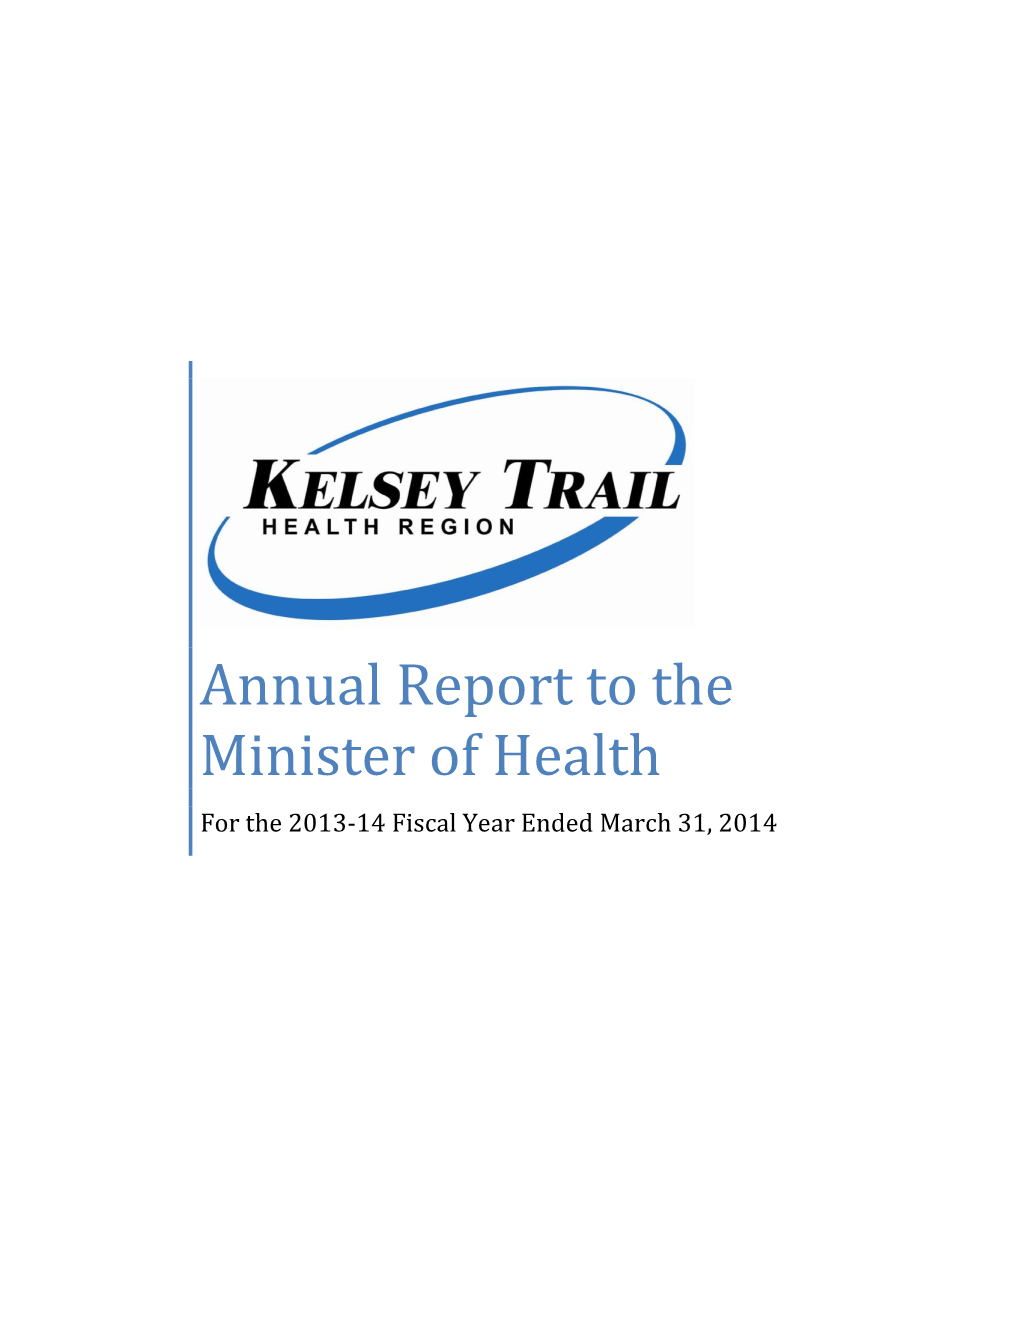 Annual Report to the Minister of Health